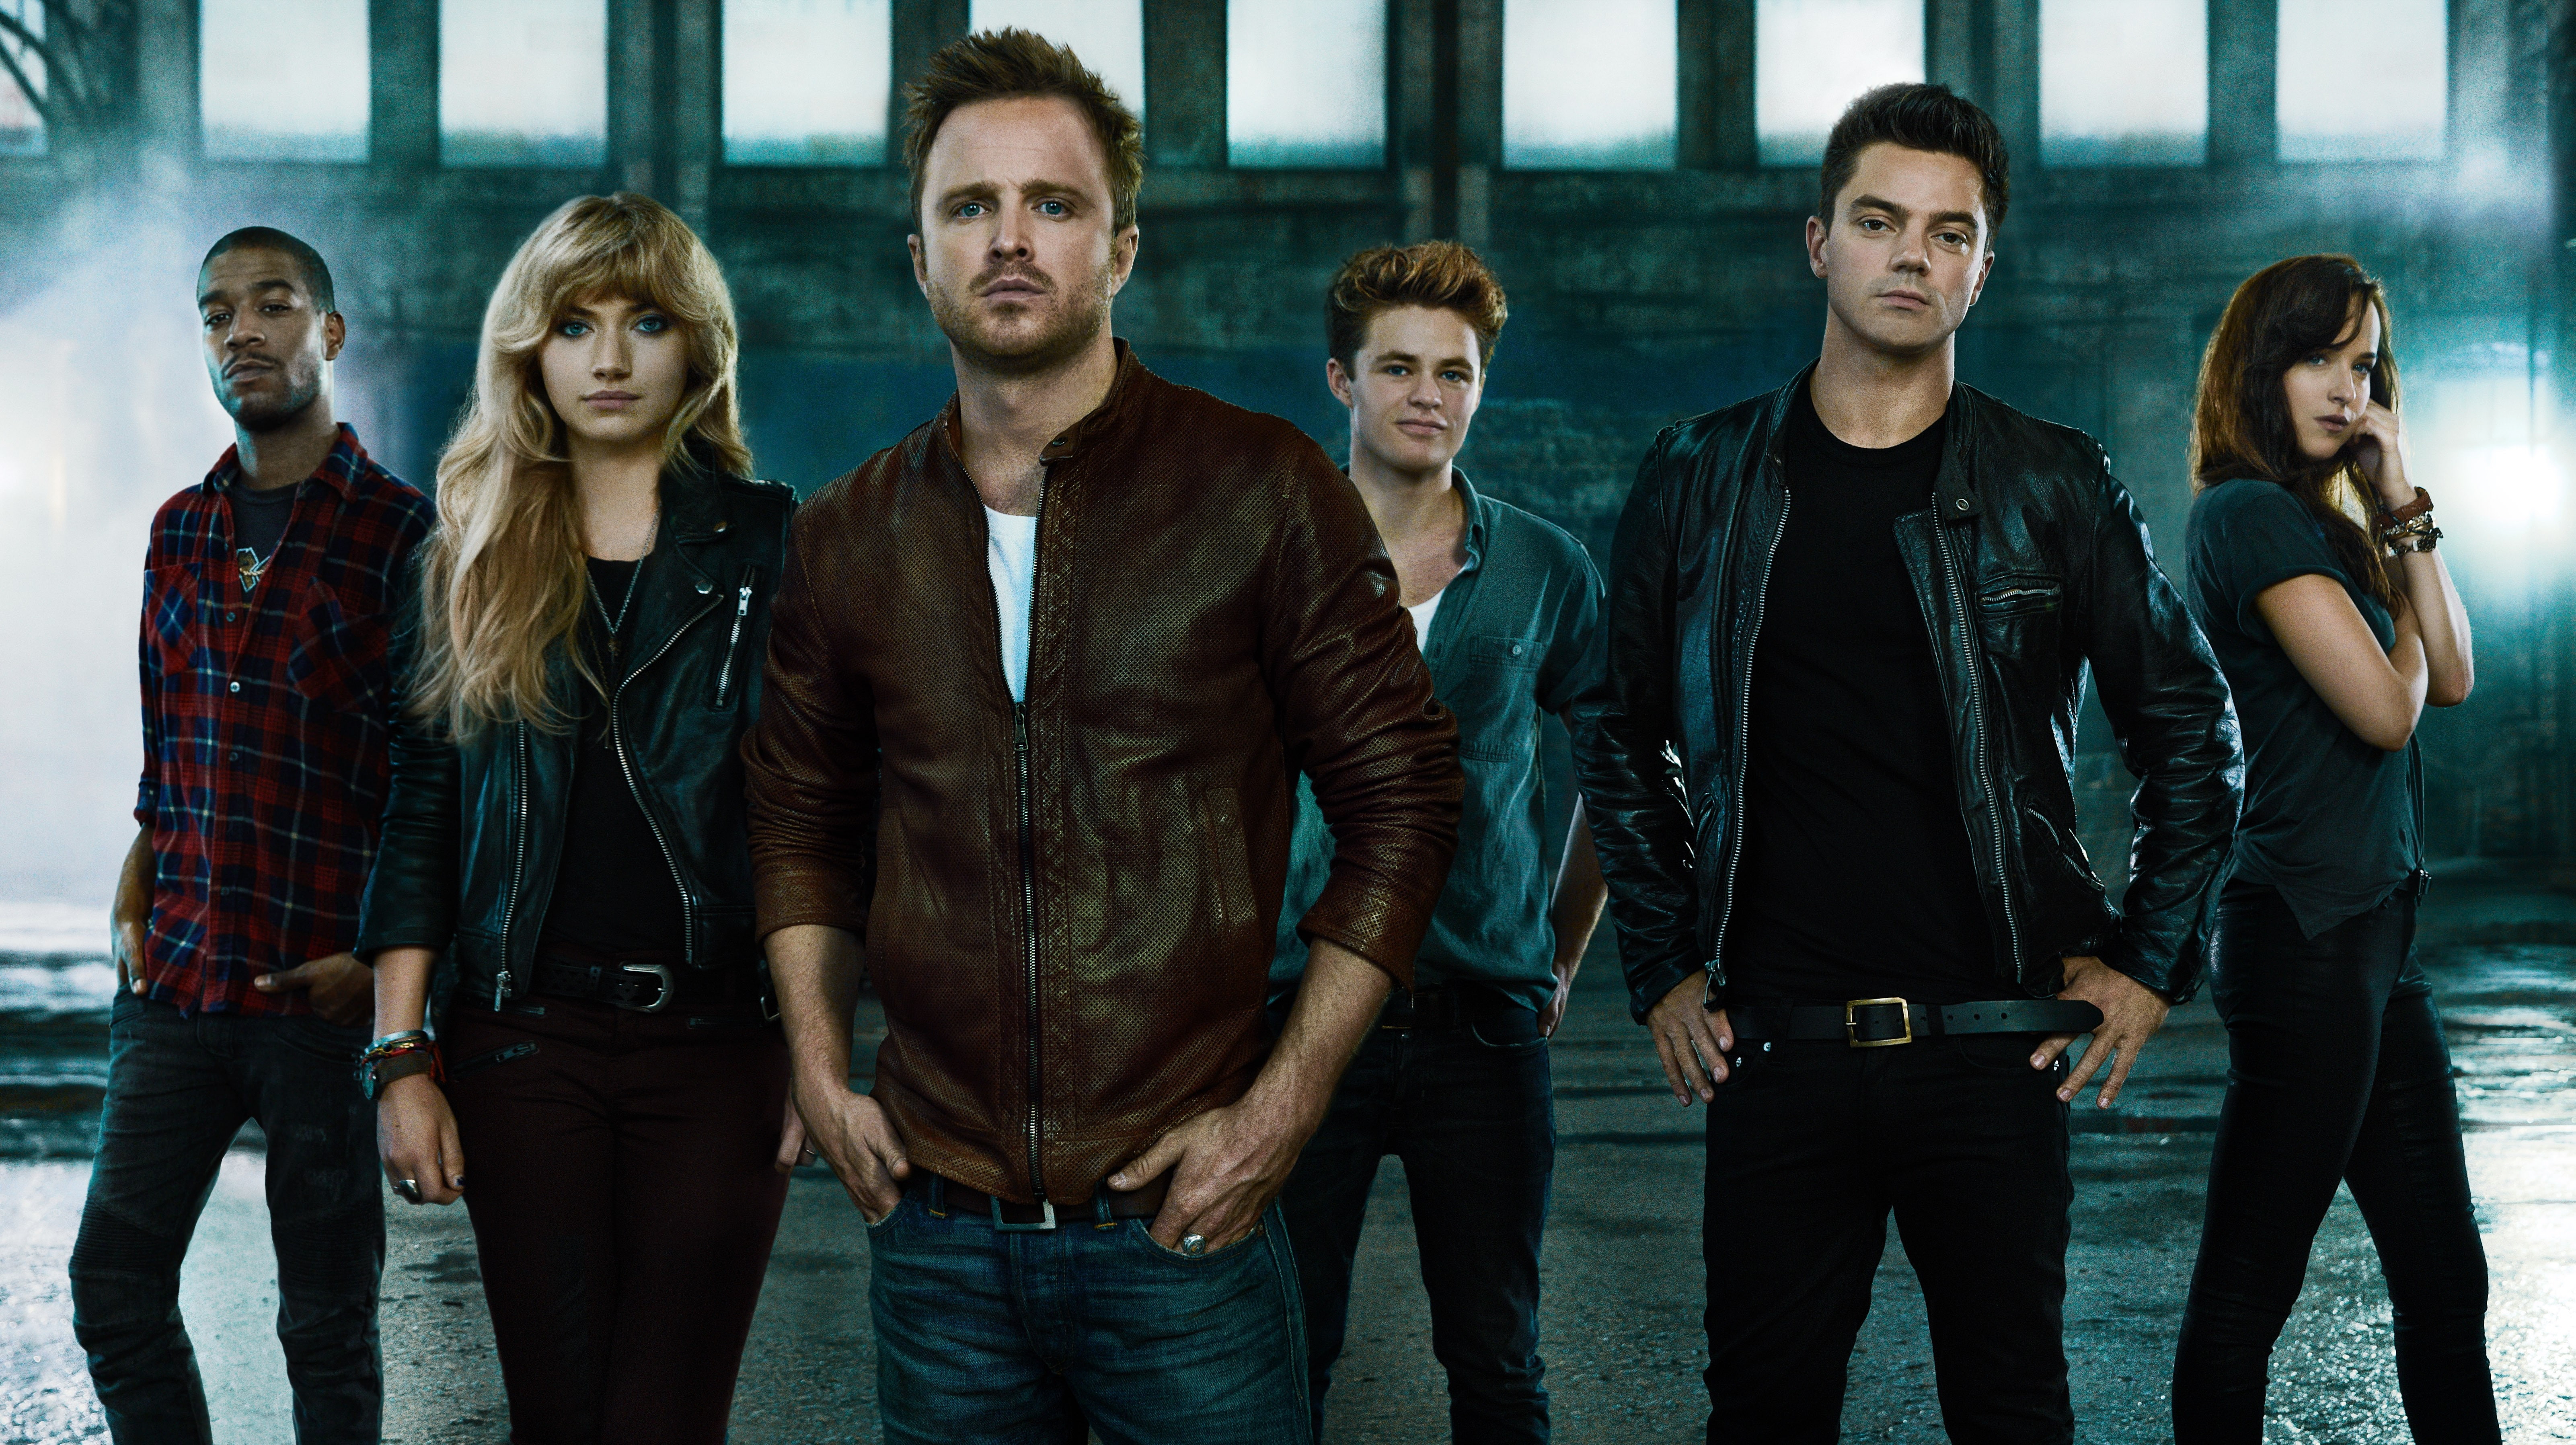 Need for speed, Aaron paul, Imogen poots, group of people, young men